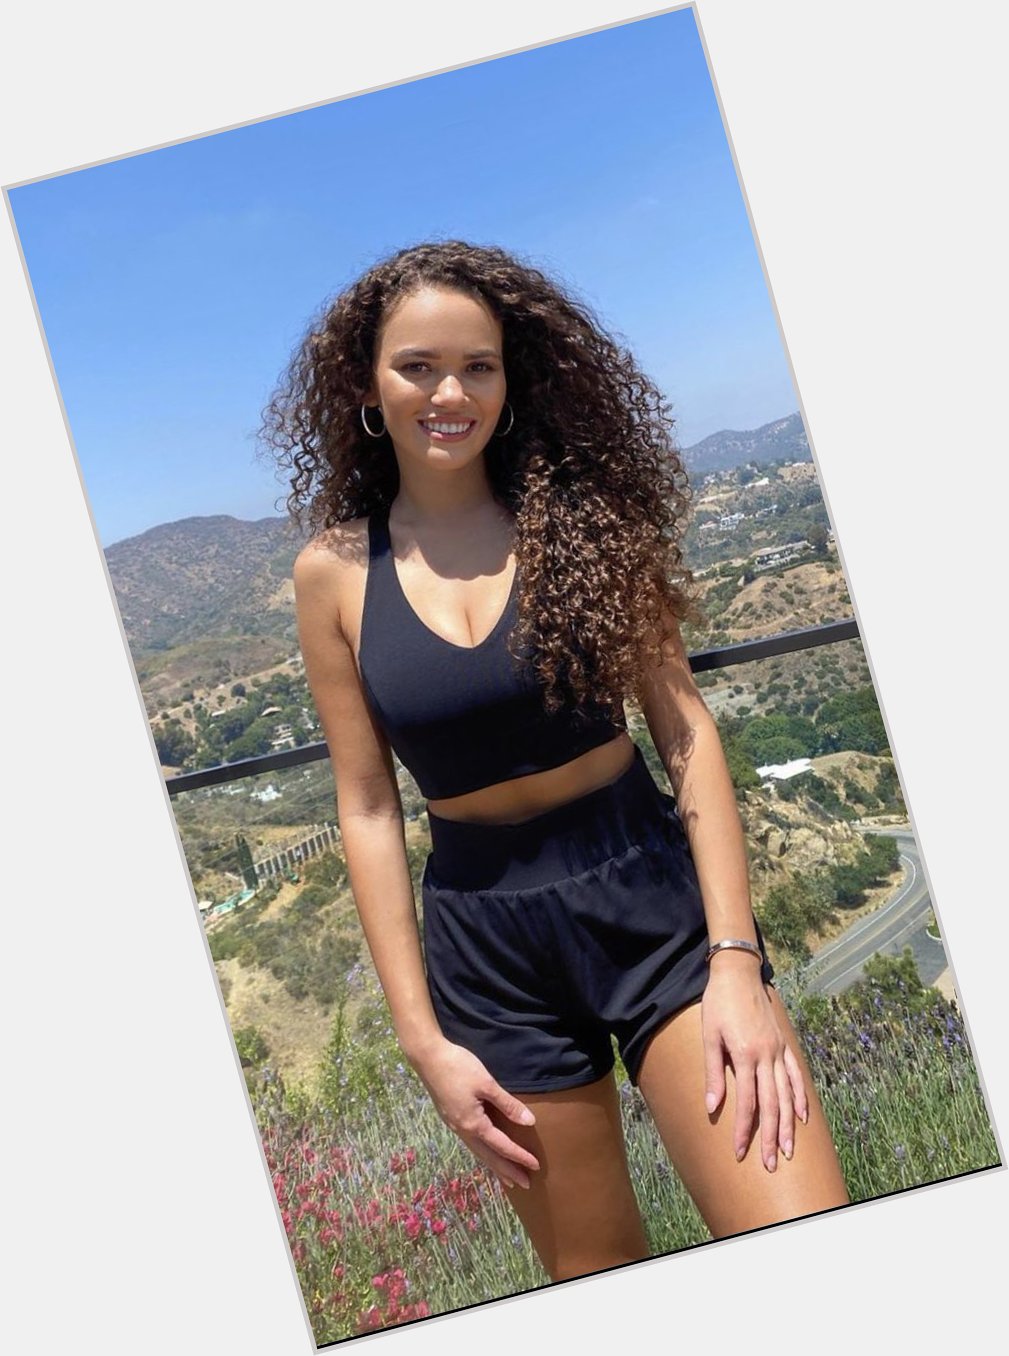 Happy Birthday to the lovely Madison Pettis 